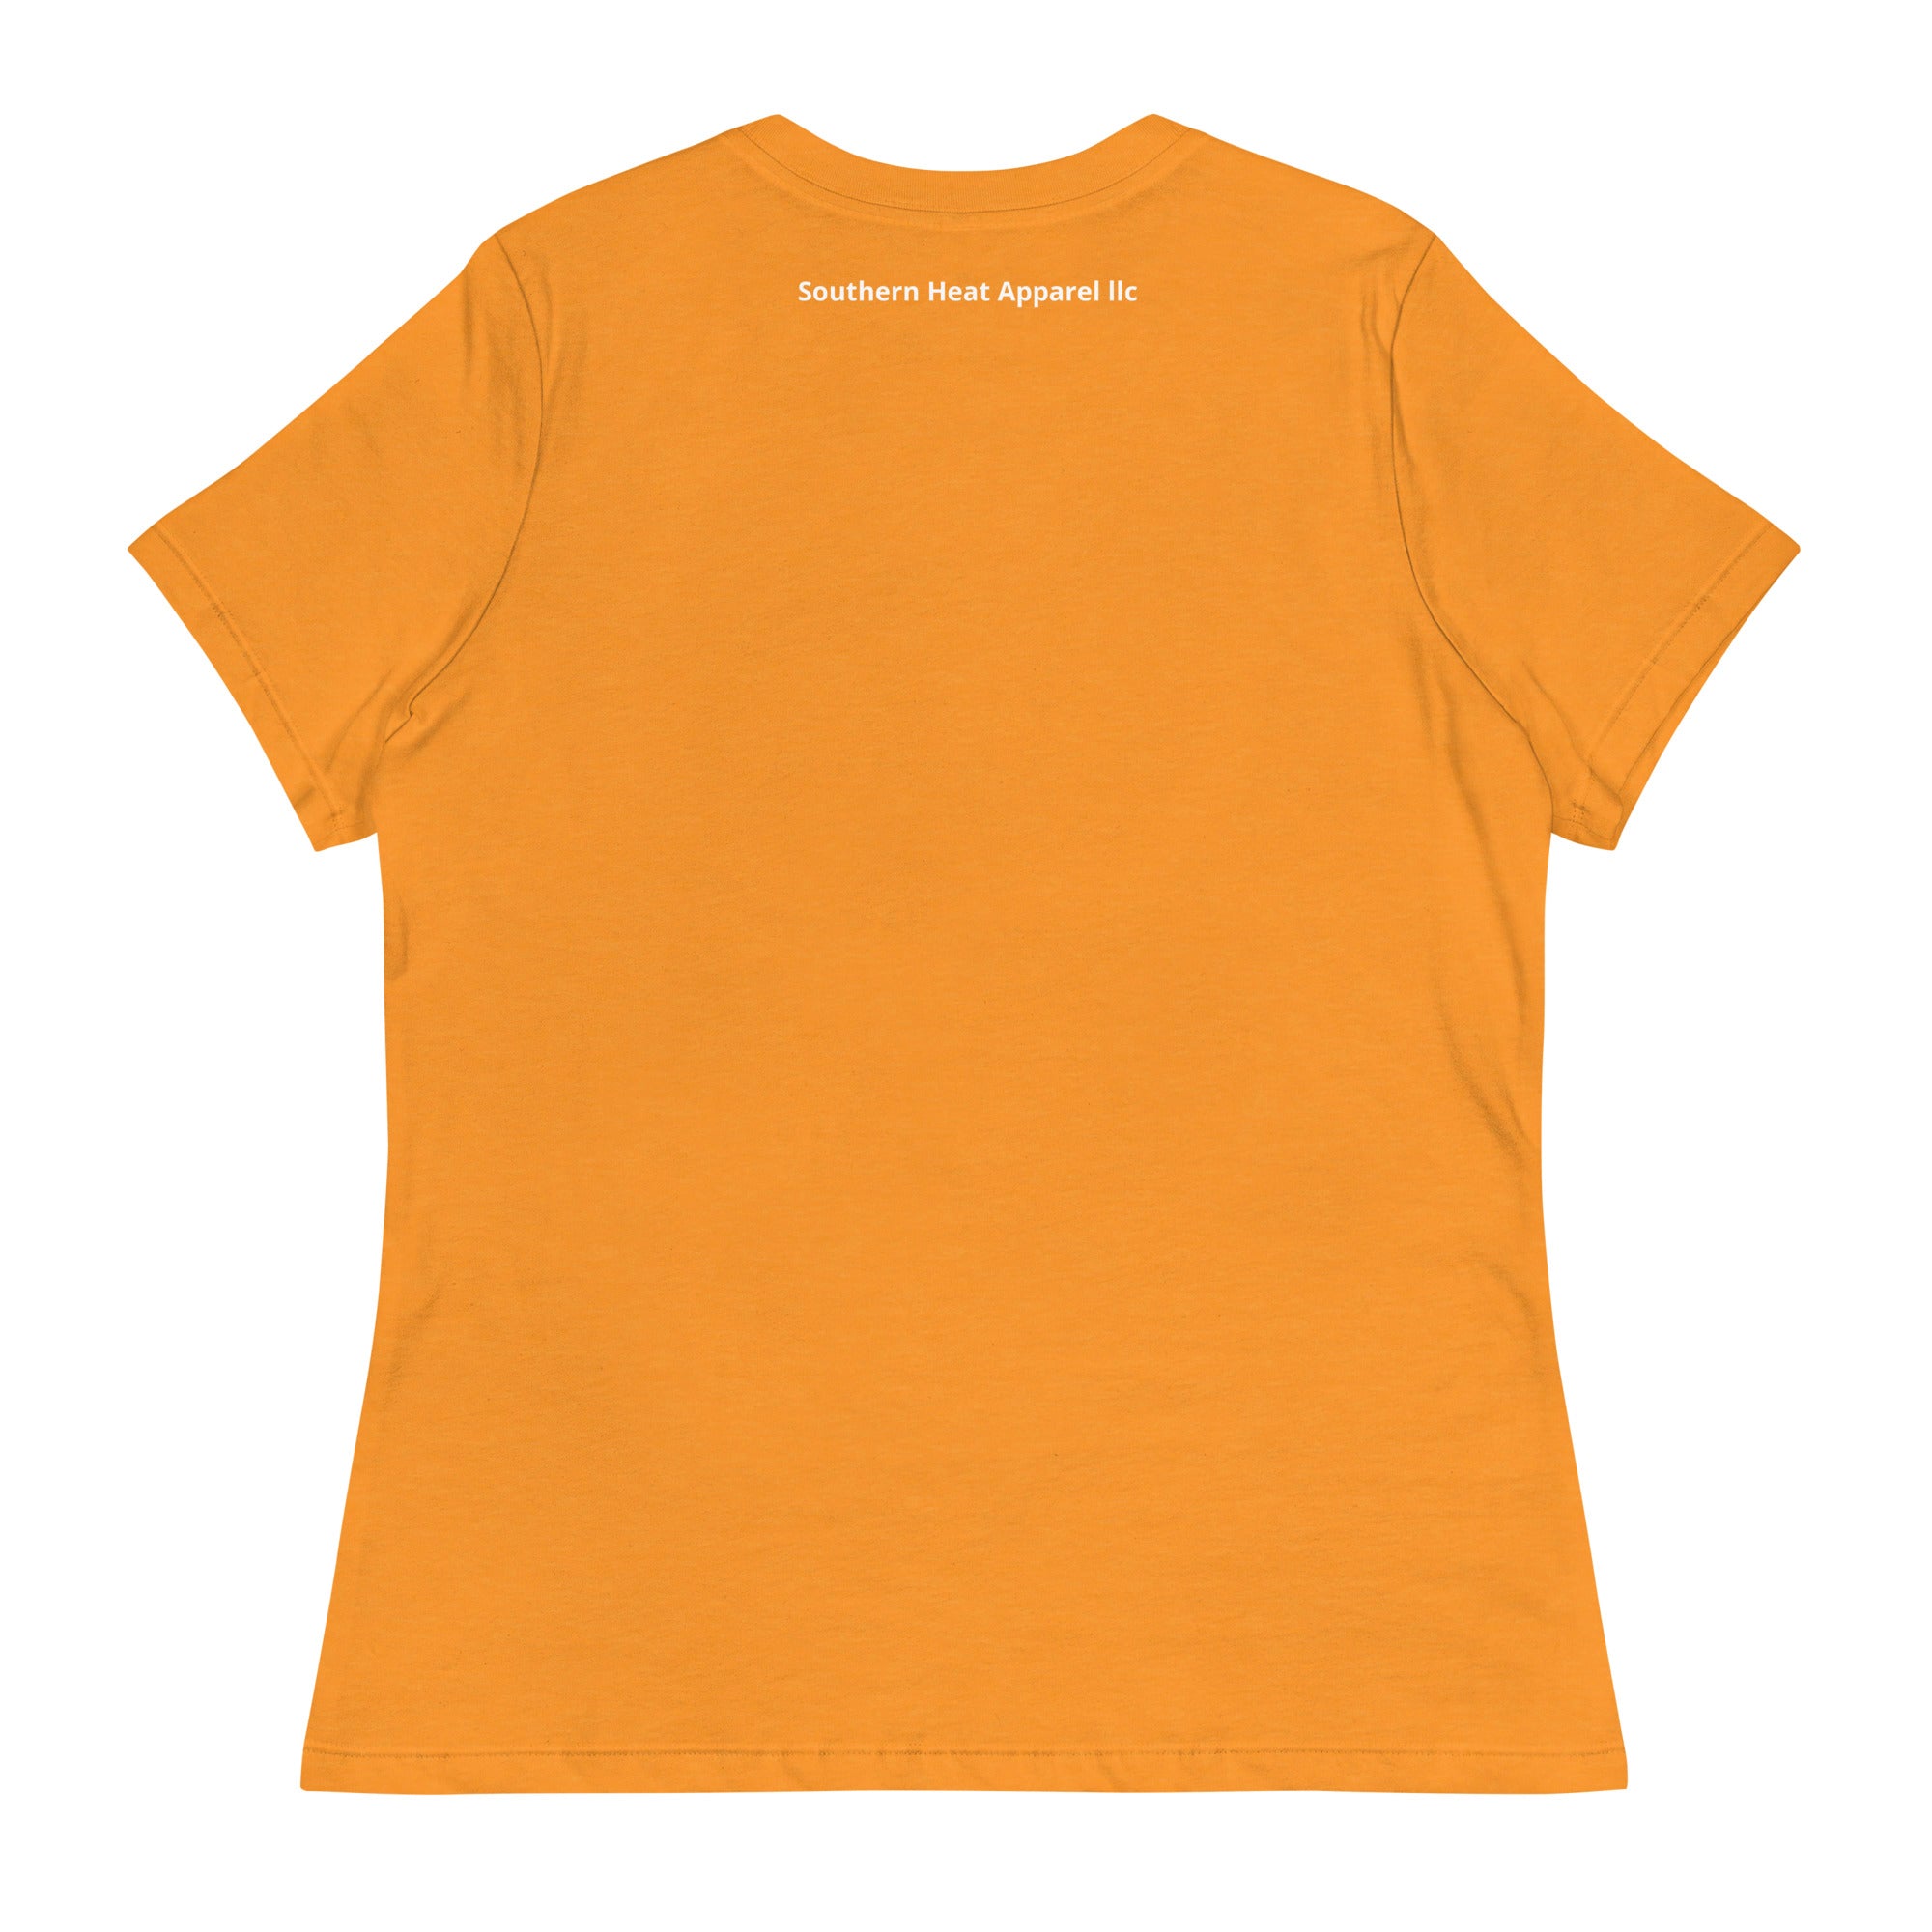 Hooked 2-Women's Relaxed T-Shirt